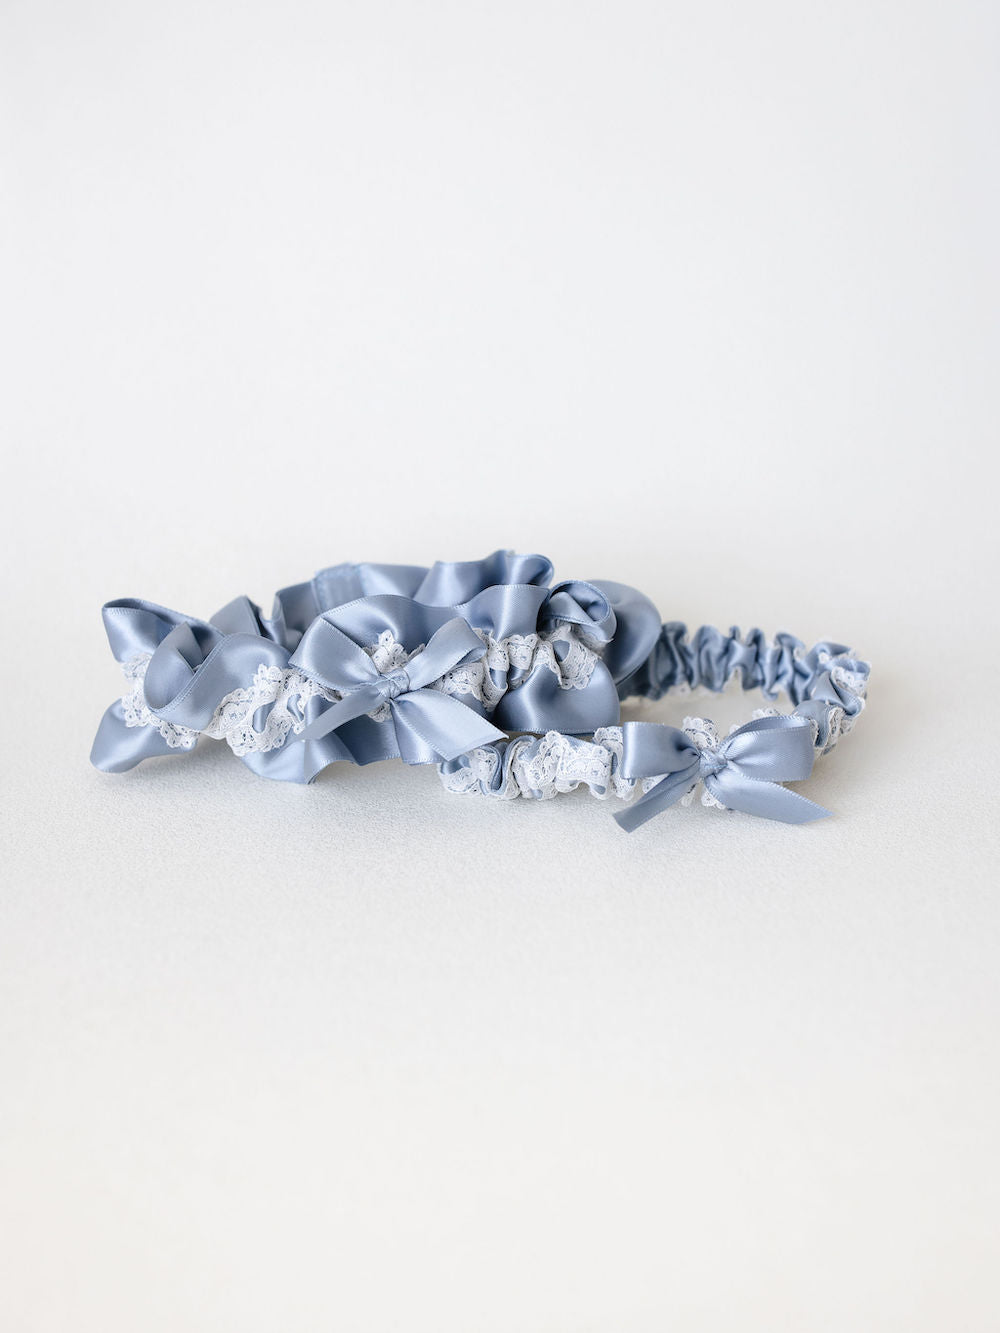 garter set in dusty blue satin with main and tossing garter handmade and embroidered by The Garter Girl